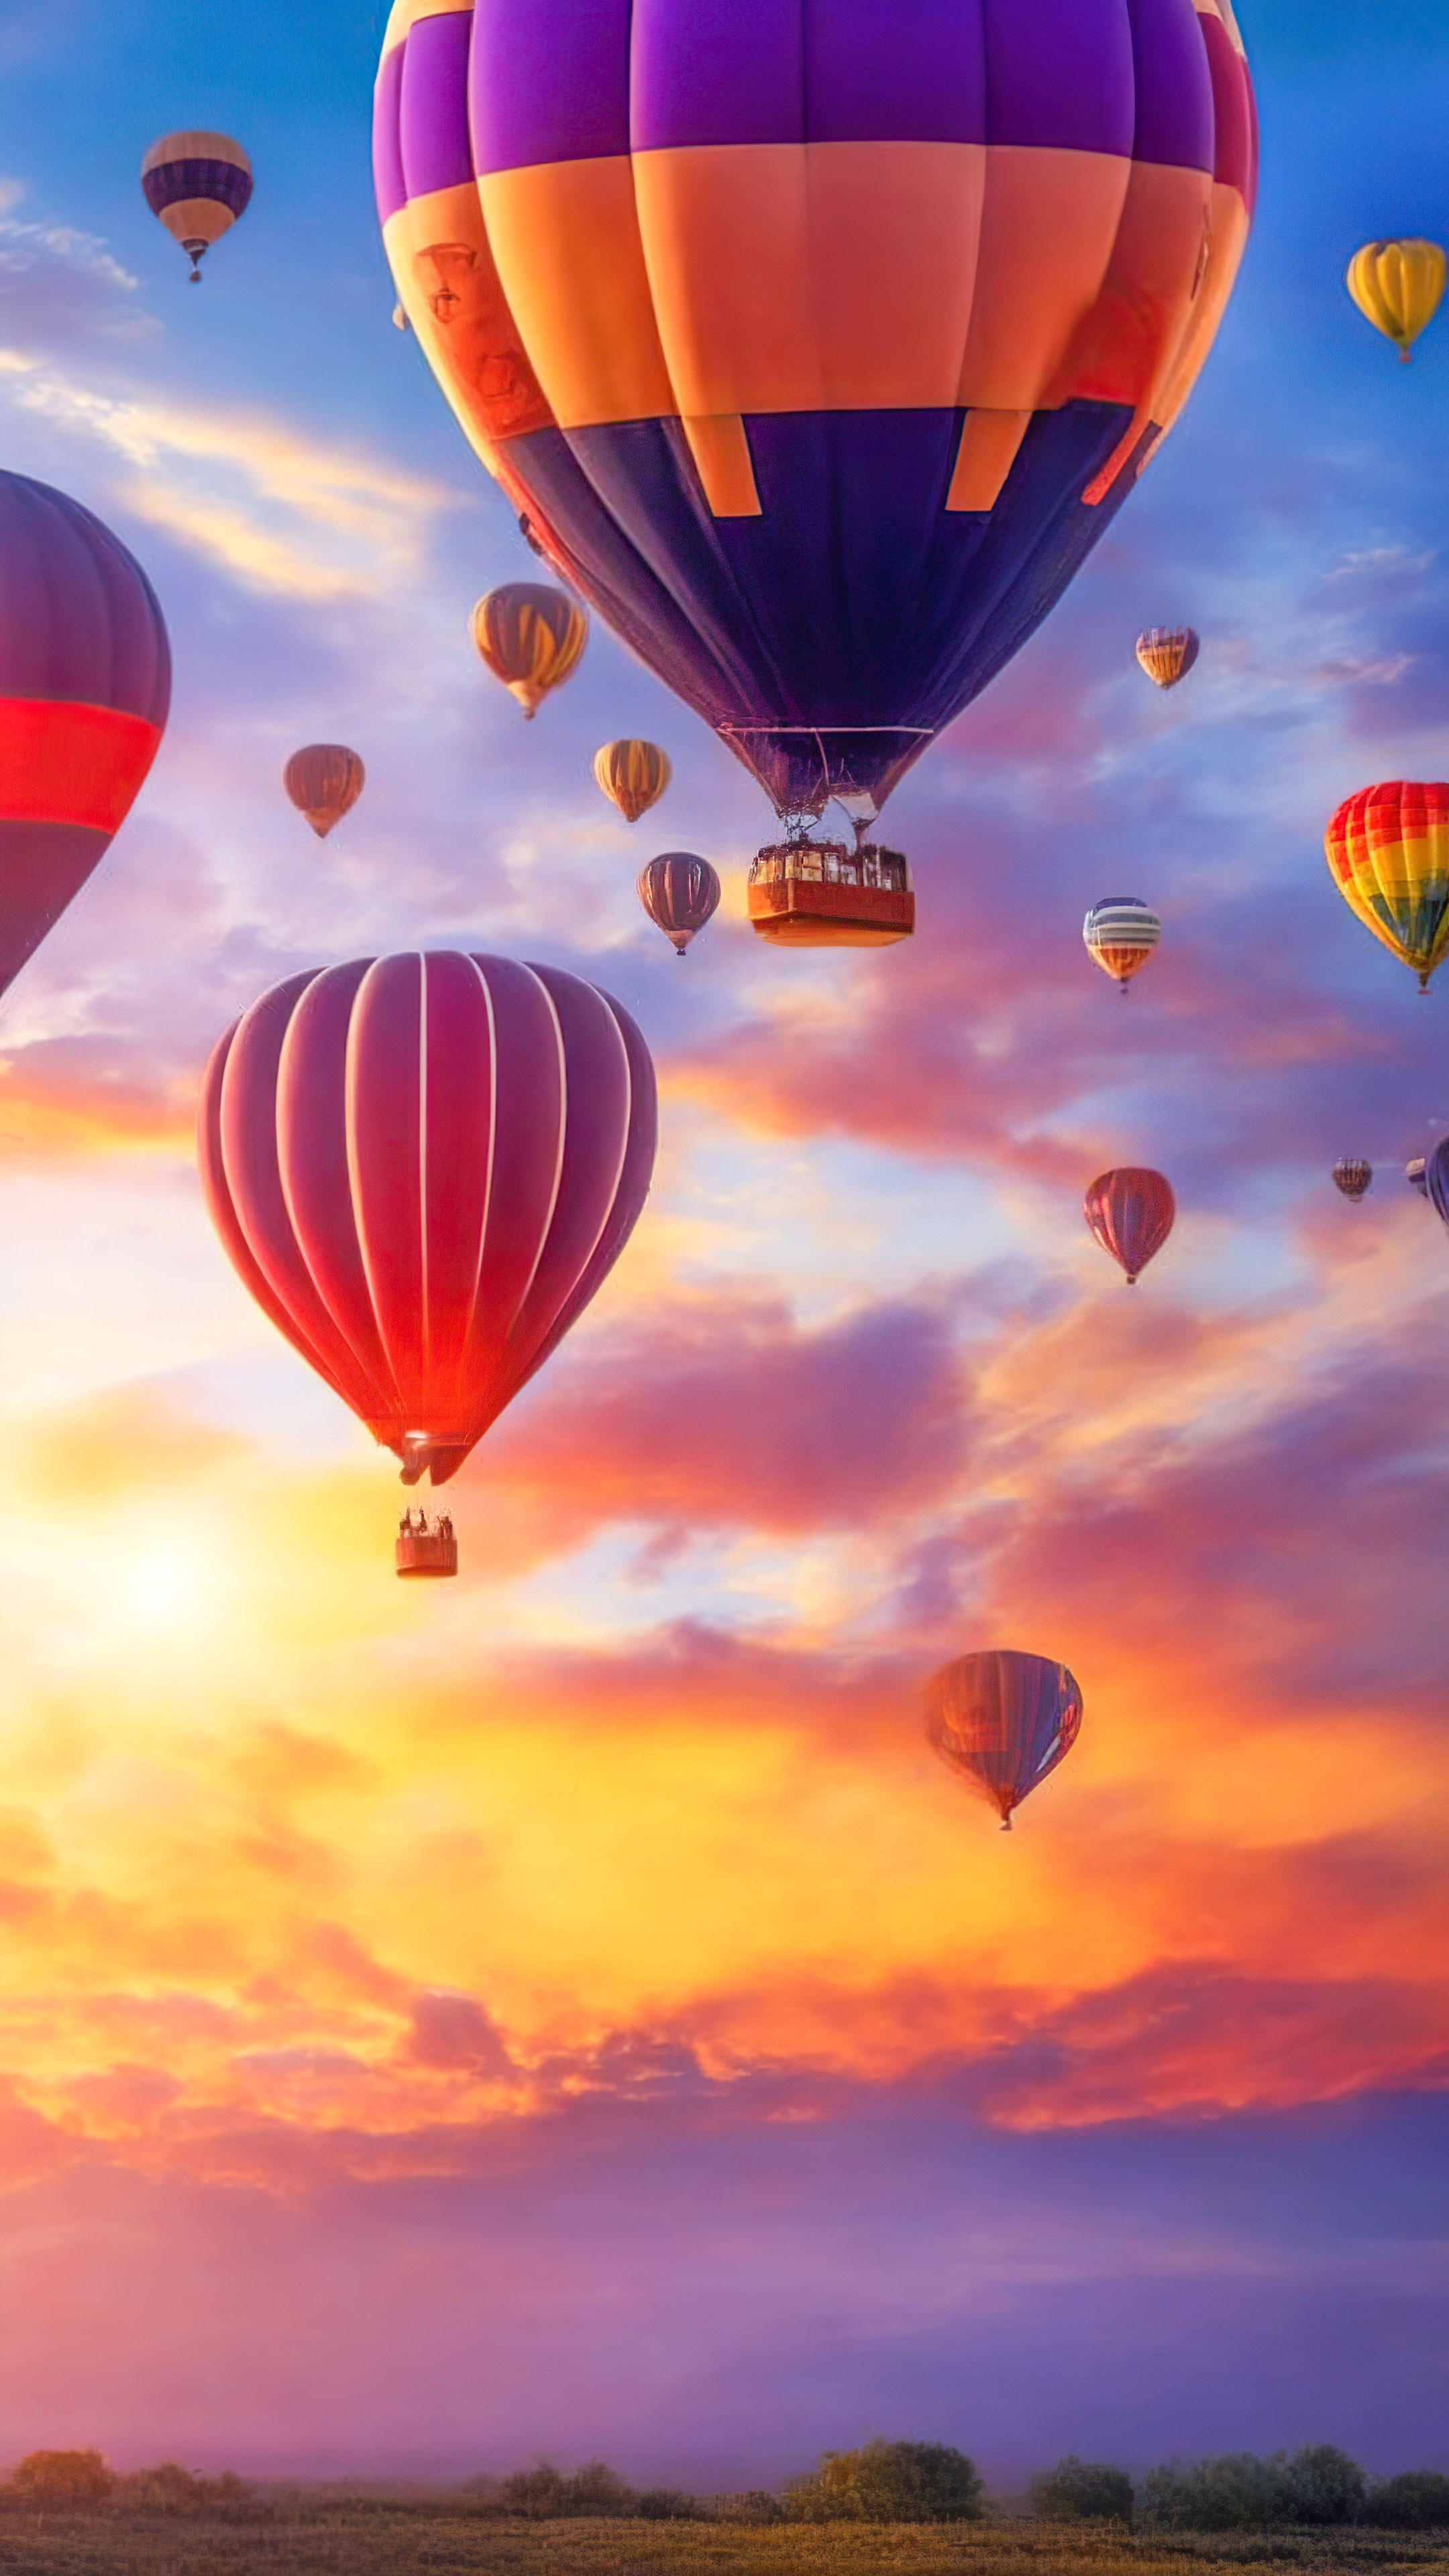 Get lost in the magic of a whimsical and dreamy sky filled with floating, colorful hot air balloons at sunrise, with clouds and sky background.